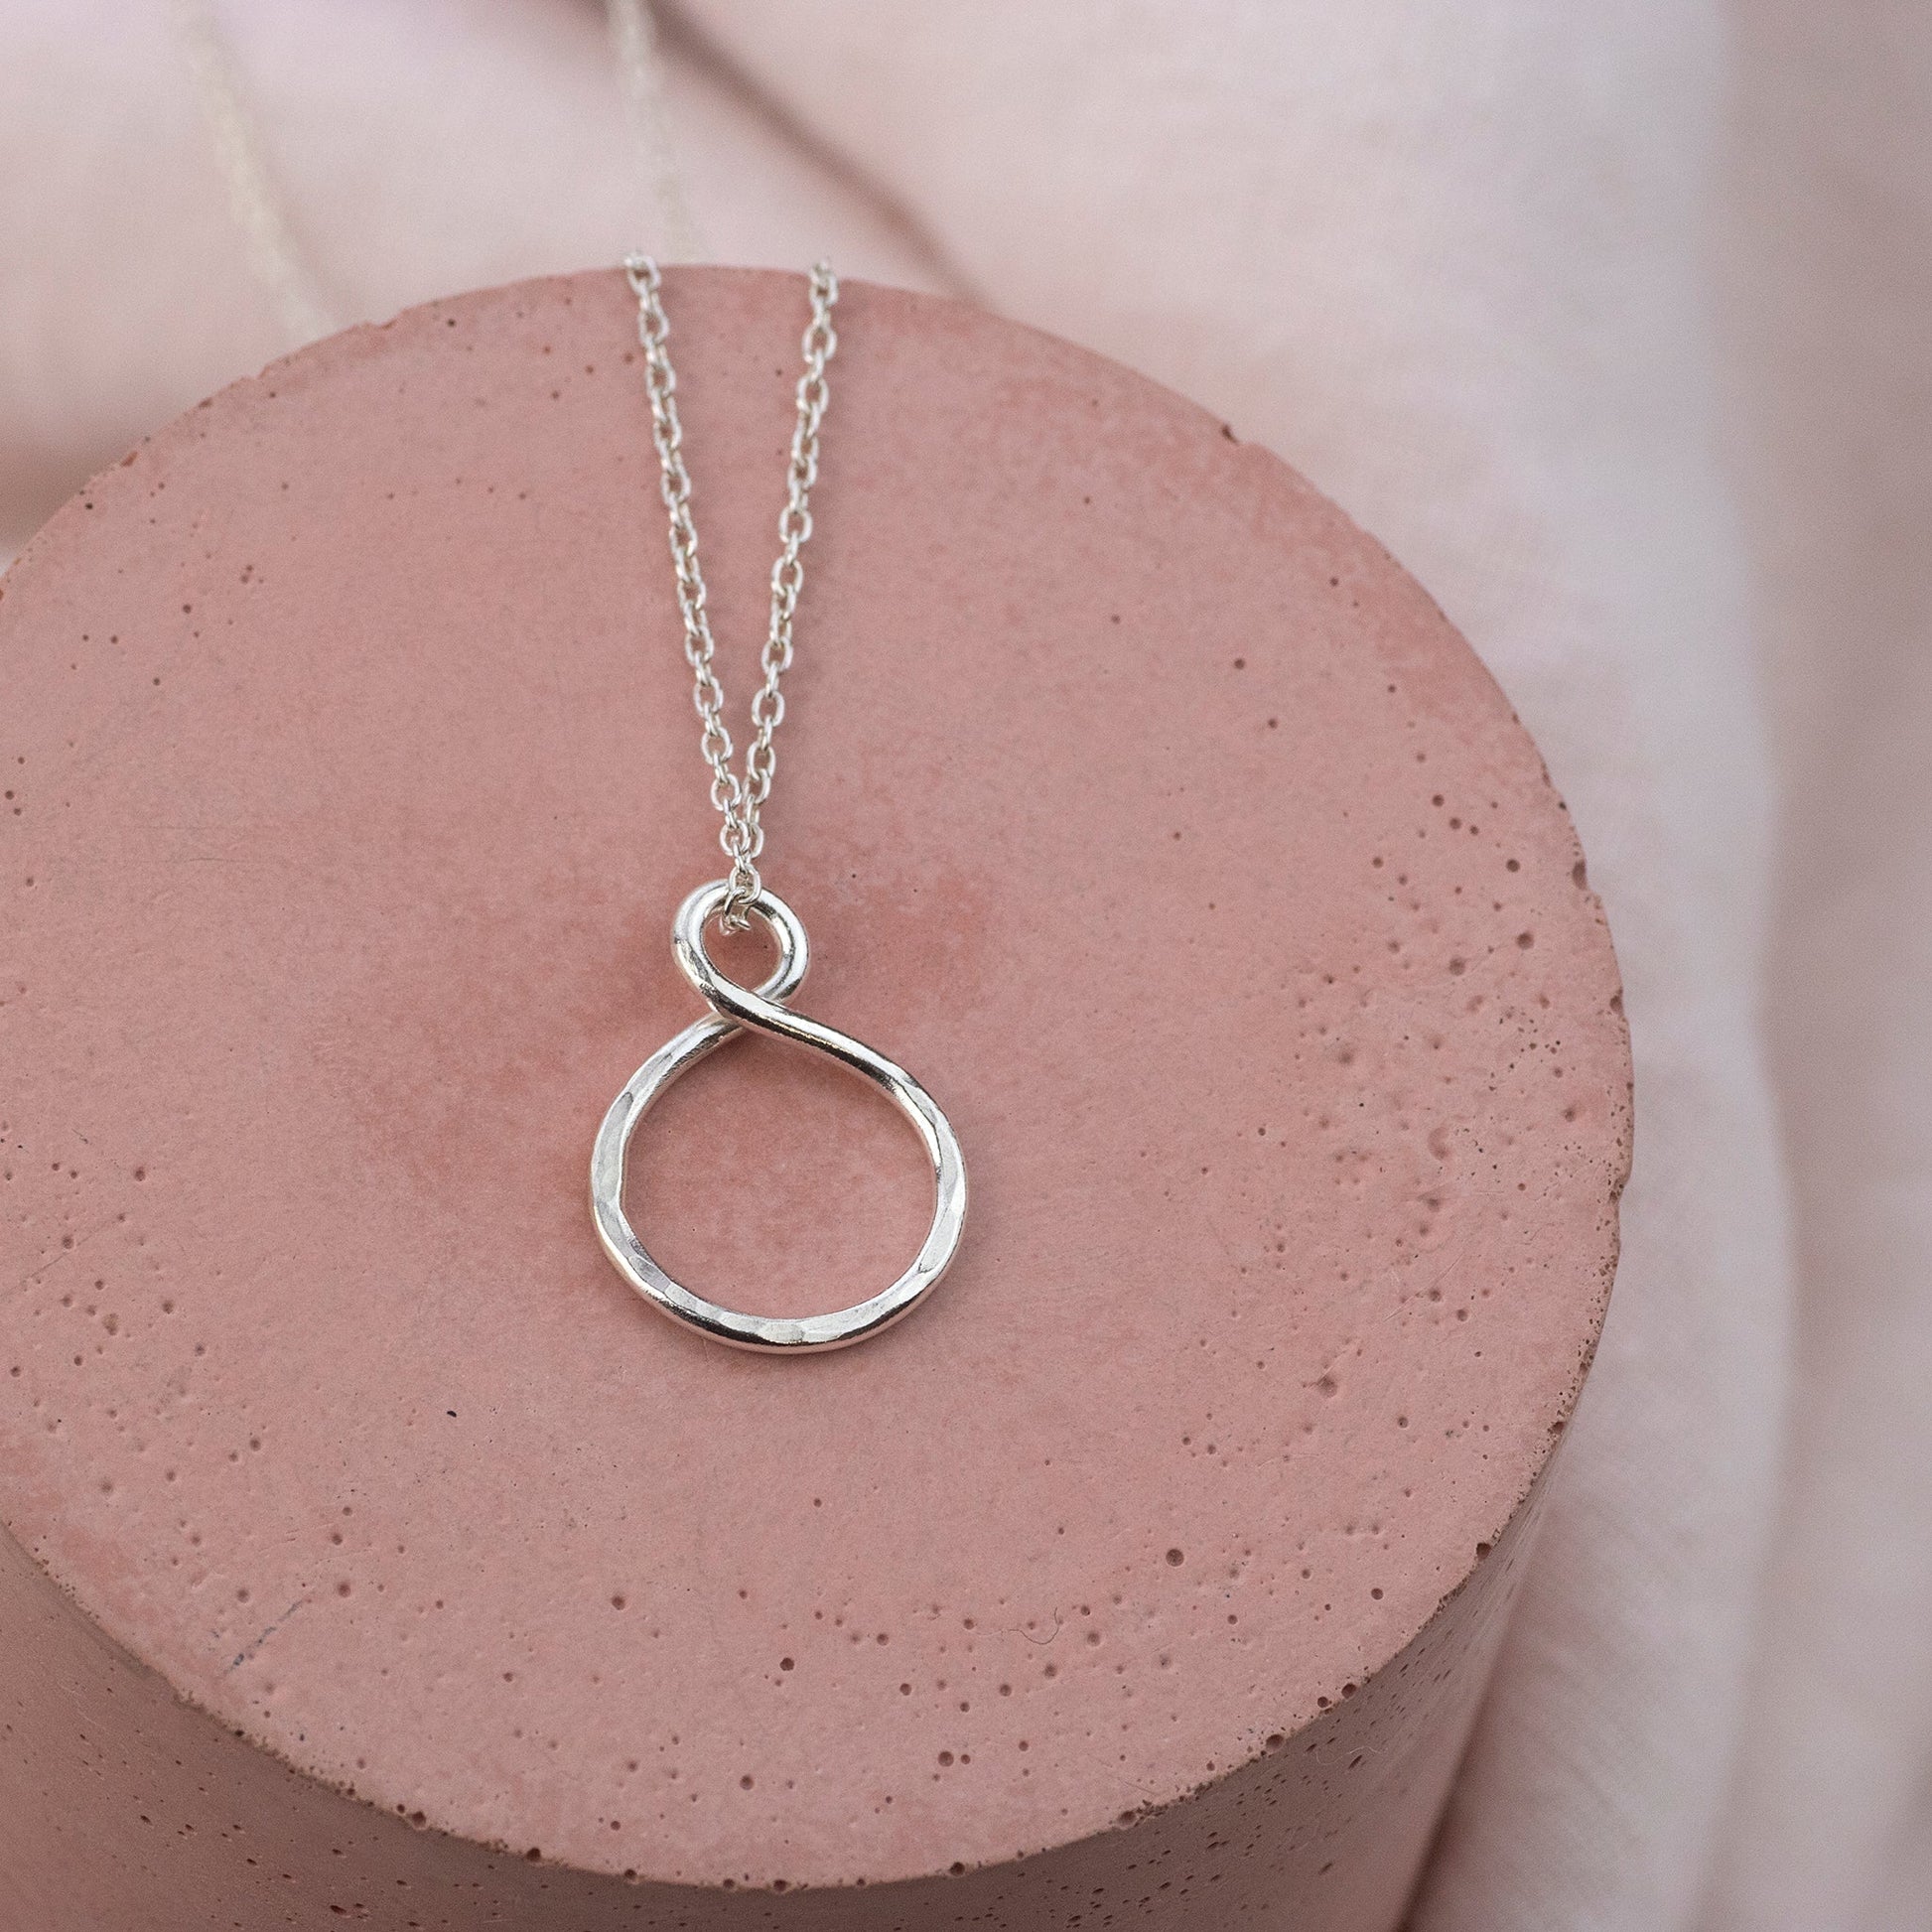 Bat Mitzvah Gift - Petite Infinity Necklace - Silver